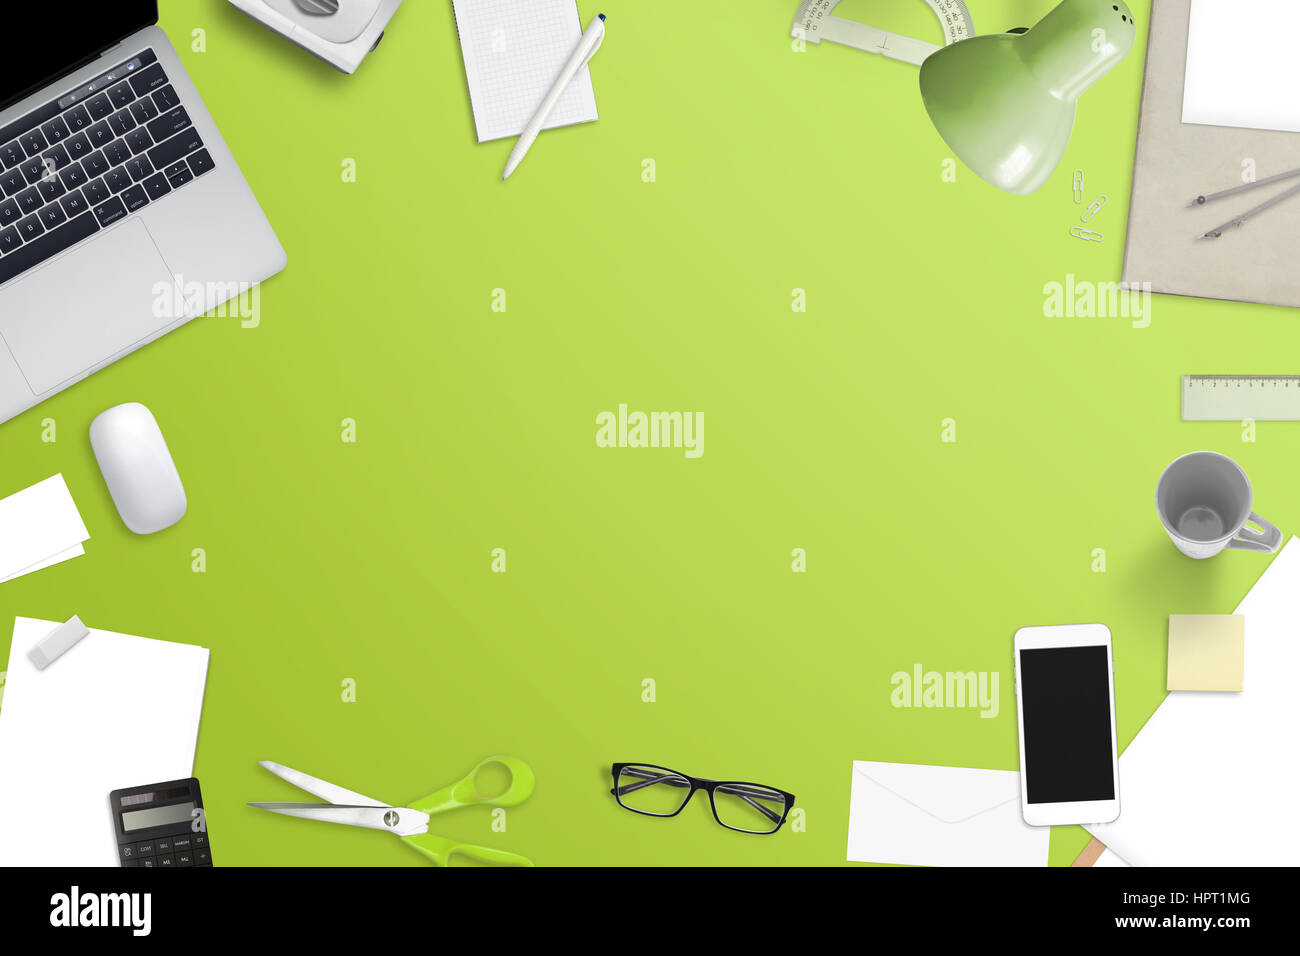 Mess on office desk with free space for text. Laptop computer, smart phone and office work accessories. Top view of green work space. Stock Photo